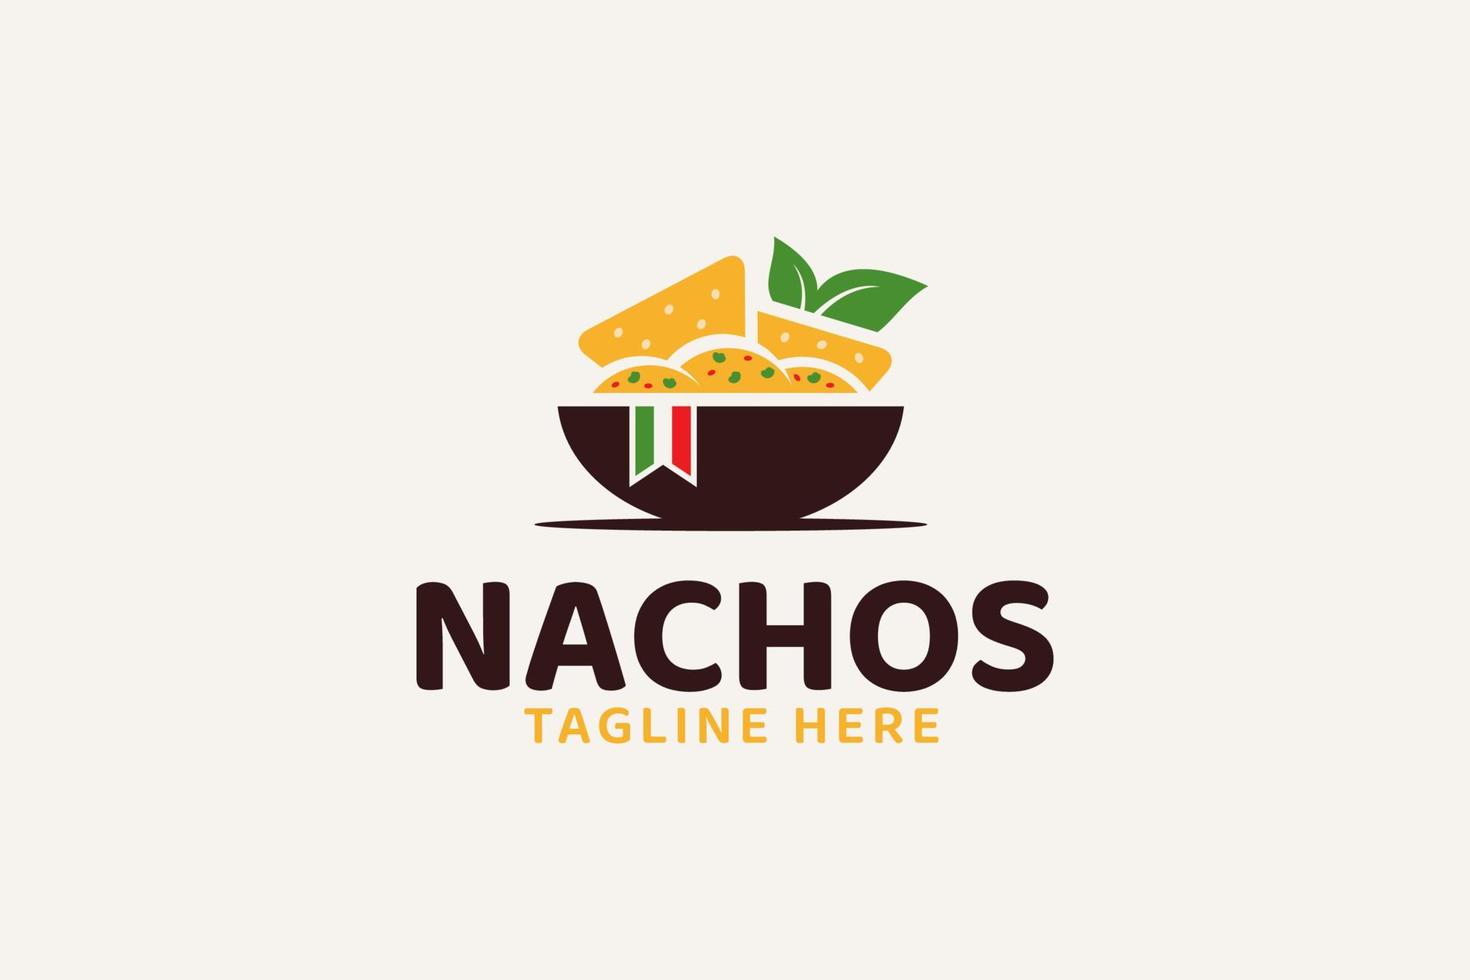 nachos logo for any business especially for food and beverage, fast food, delivery food, food truck, cafe, etc. vector